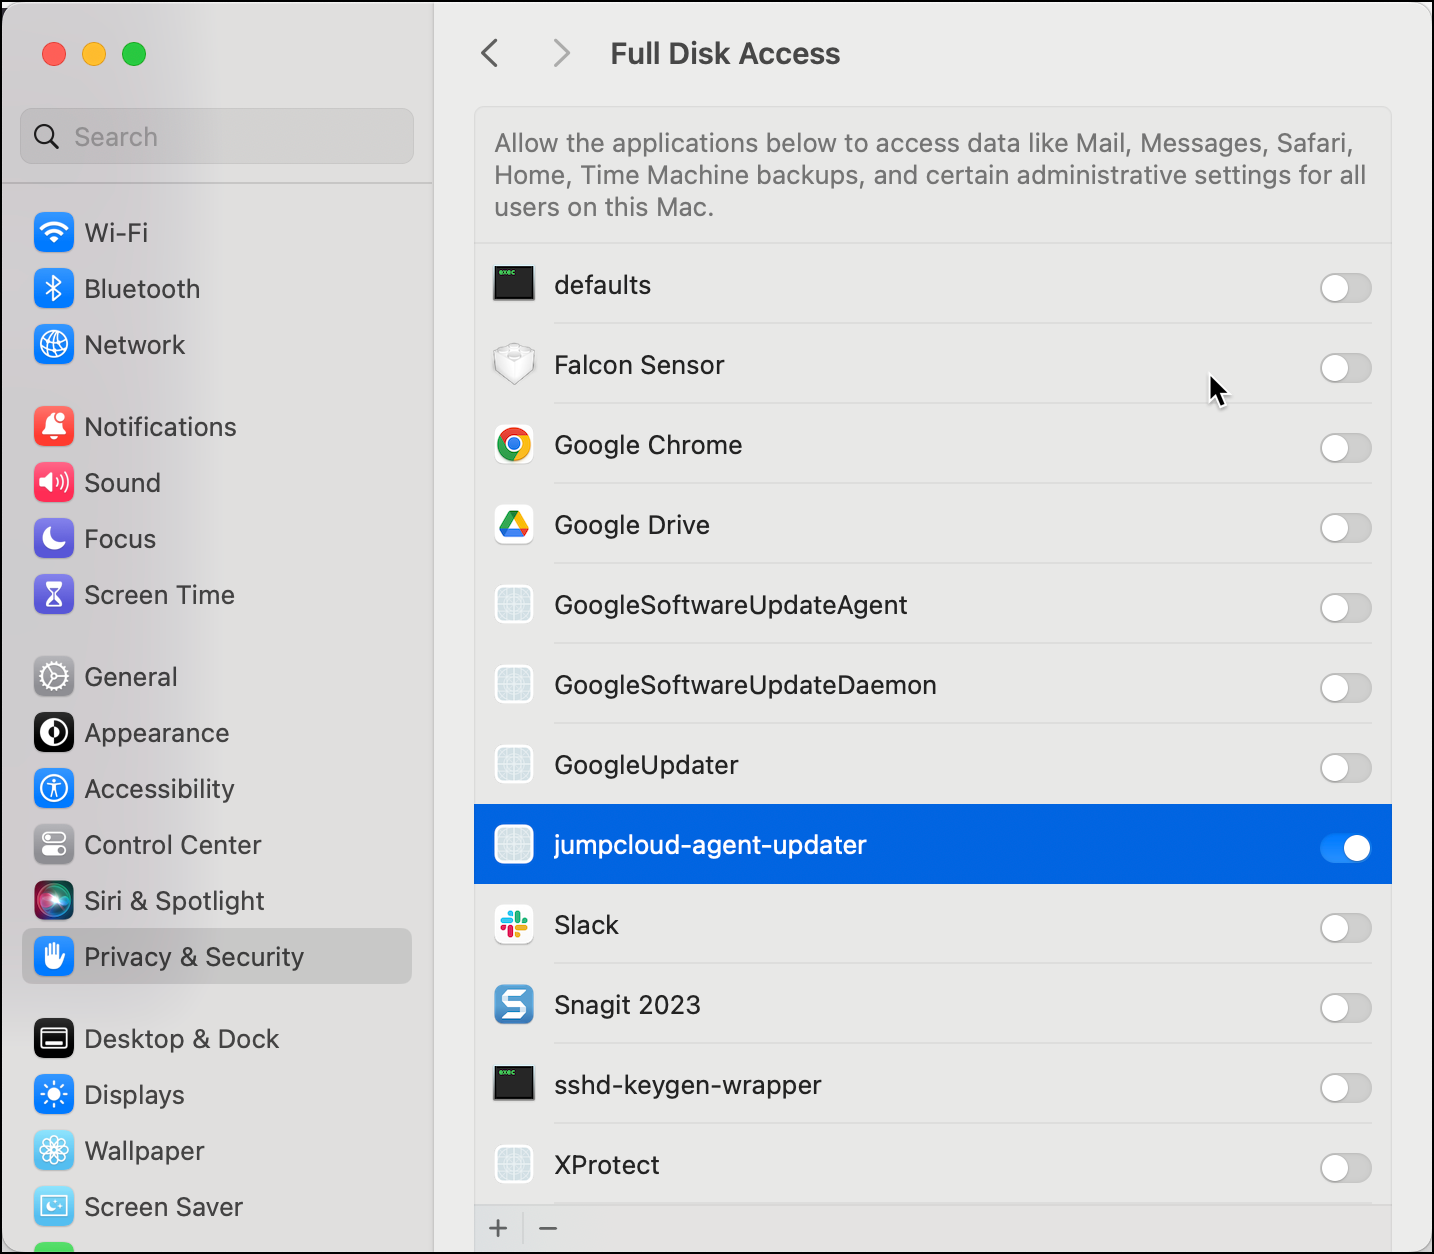 Find Full Disk Access permissions in the Apple's Privacy & Security settings